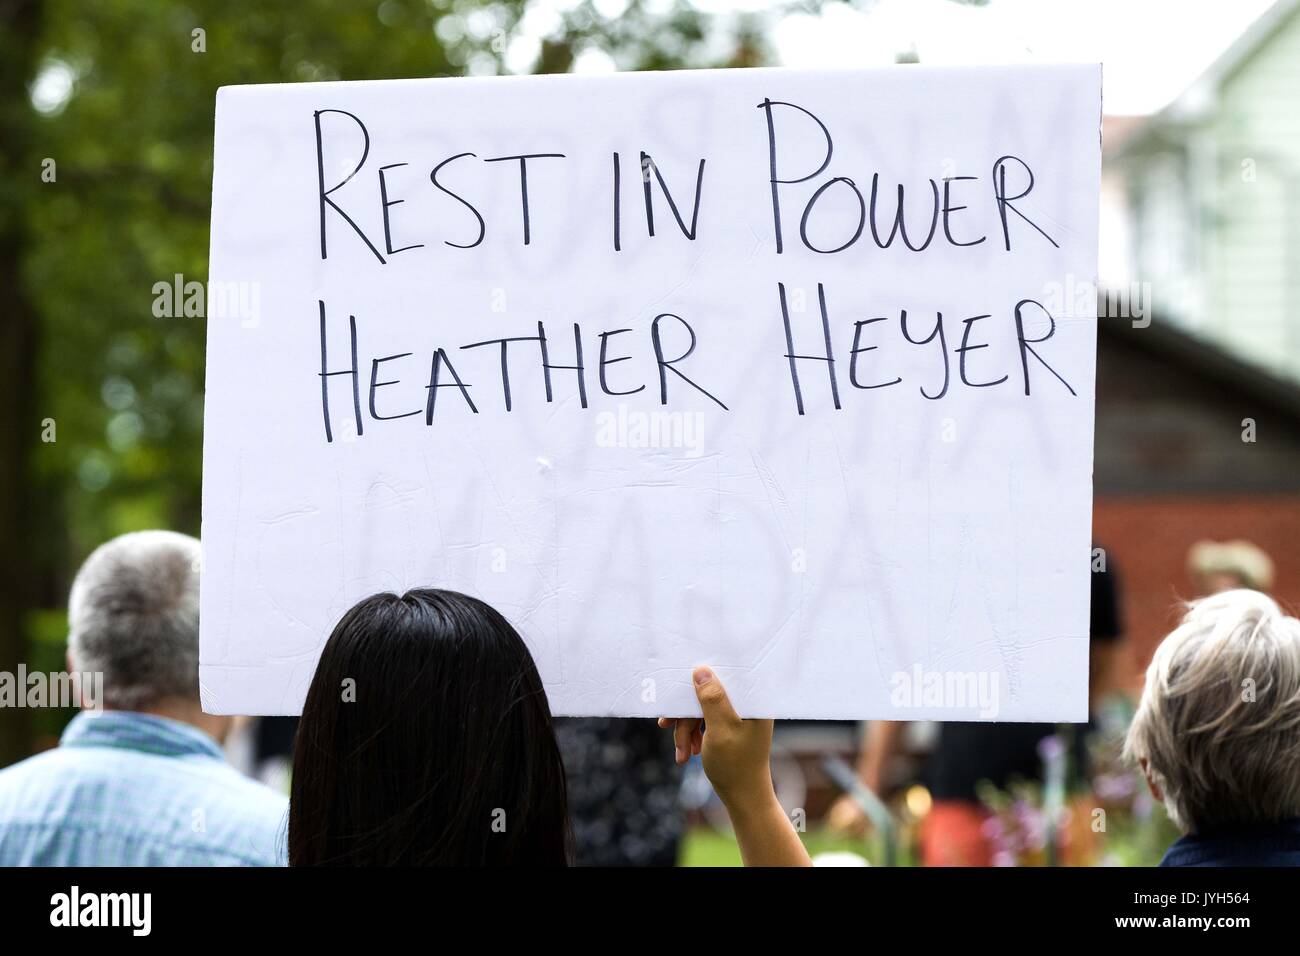 Kingston, Ontario, Canada. 19th Aug, 2017. A woman holds a sign for Heather Heyer during an anti-racism rally in Kingston, Ont., on Aug. 19, 2017. Credit: Lars Hagberg/ZUMA Wire/Alamy Live News Stock Photo